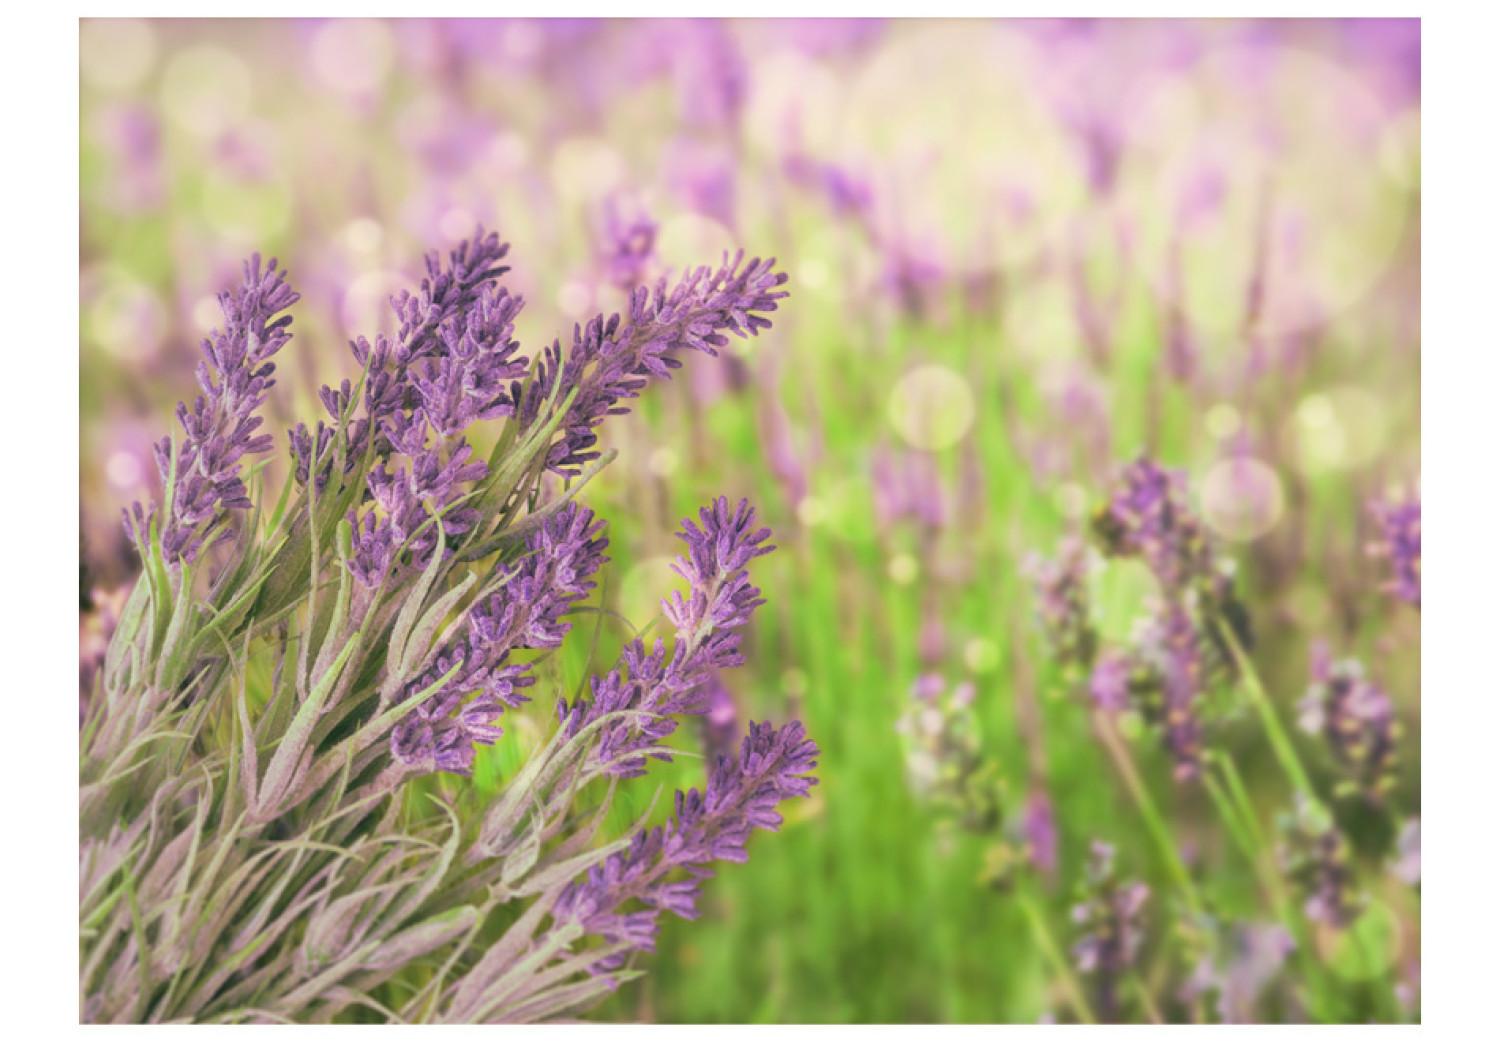 Wall Mural Lavender Gardens - Bright Meadow Landscape with a Close-up of Lavender Flowers